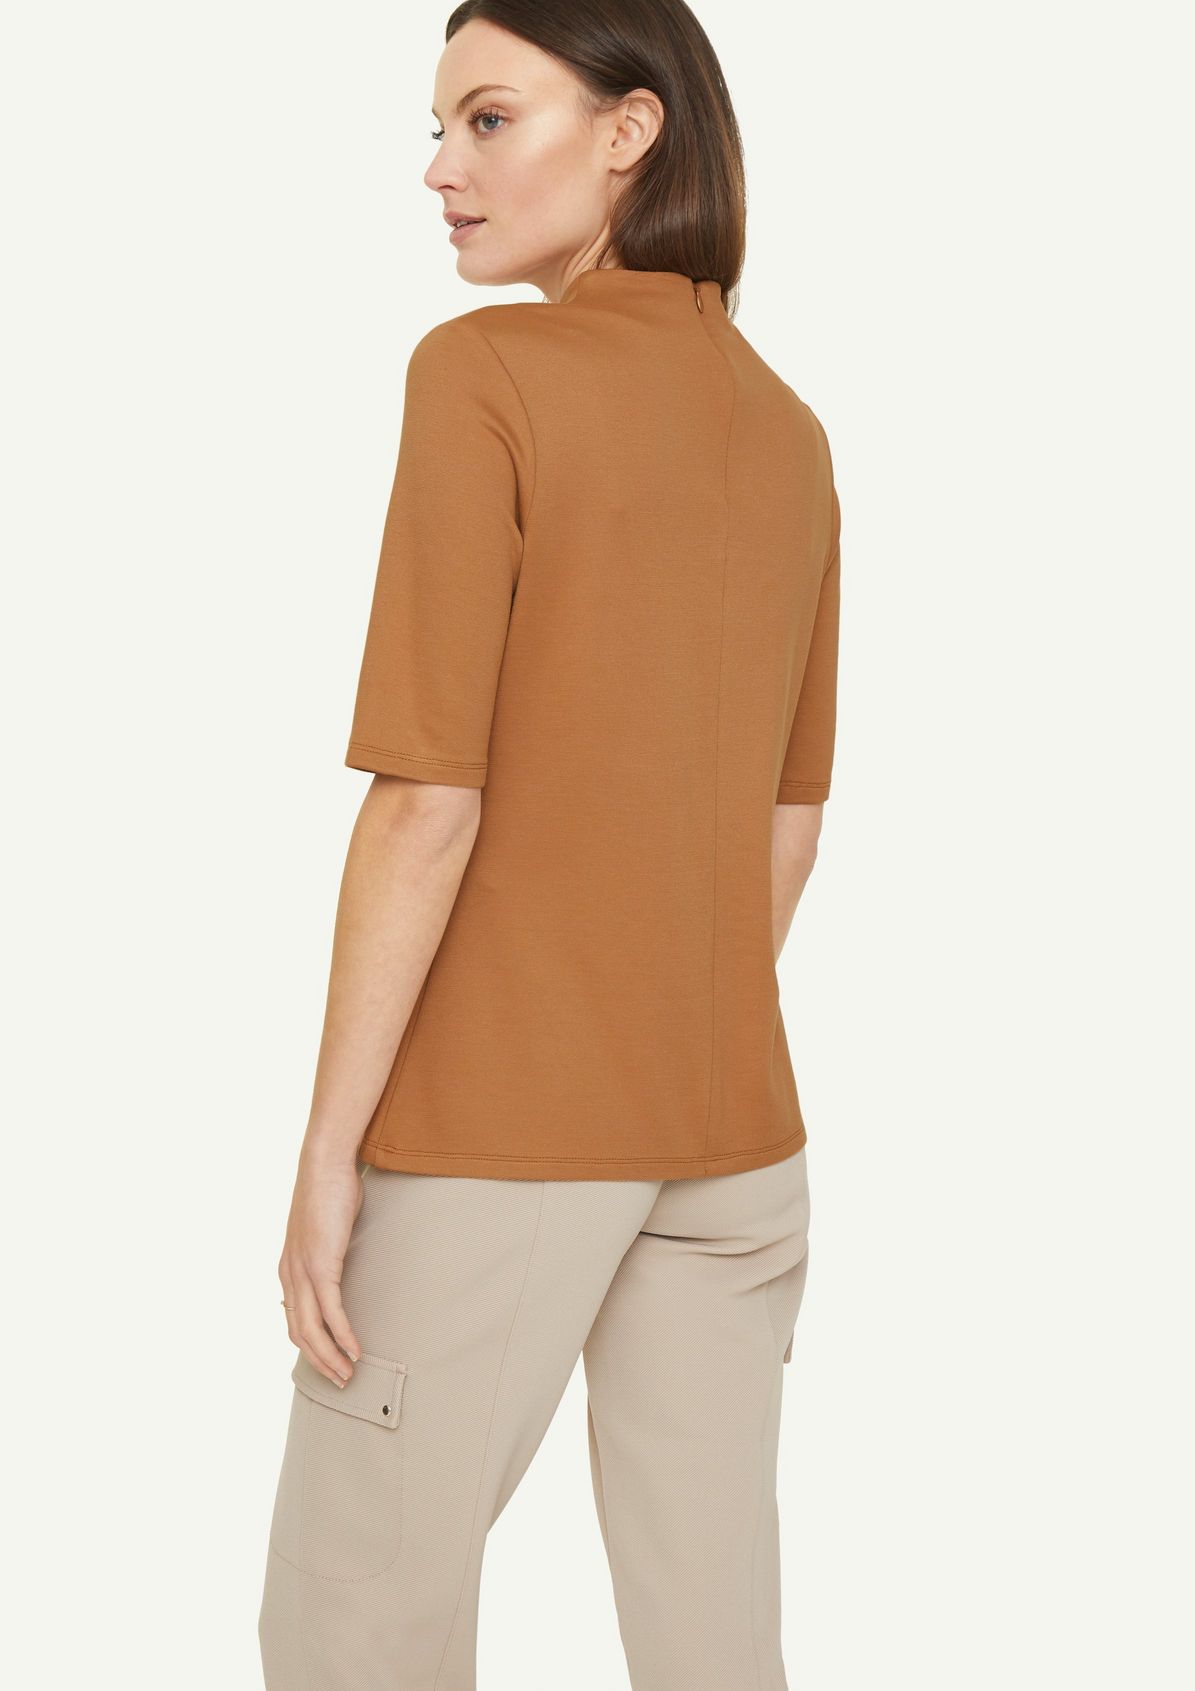 Ponte di Roma jersey top from comma